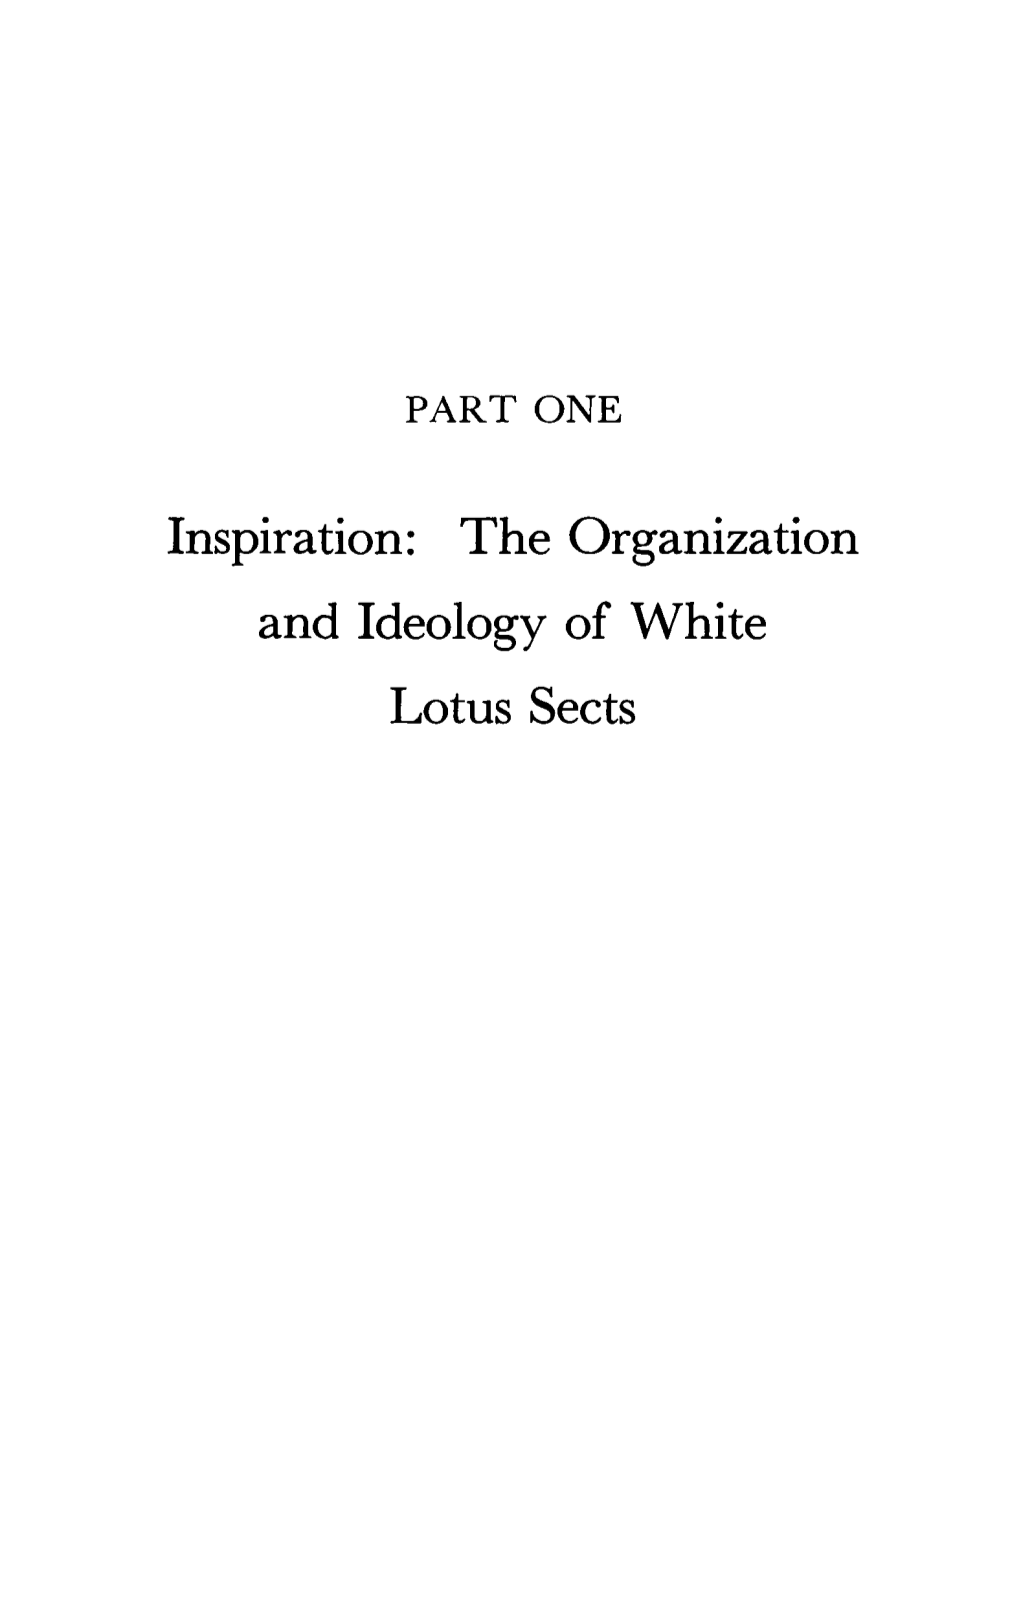 Inspiration: the Organization and Ideology of White Lotus Sects